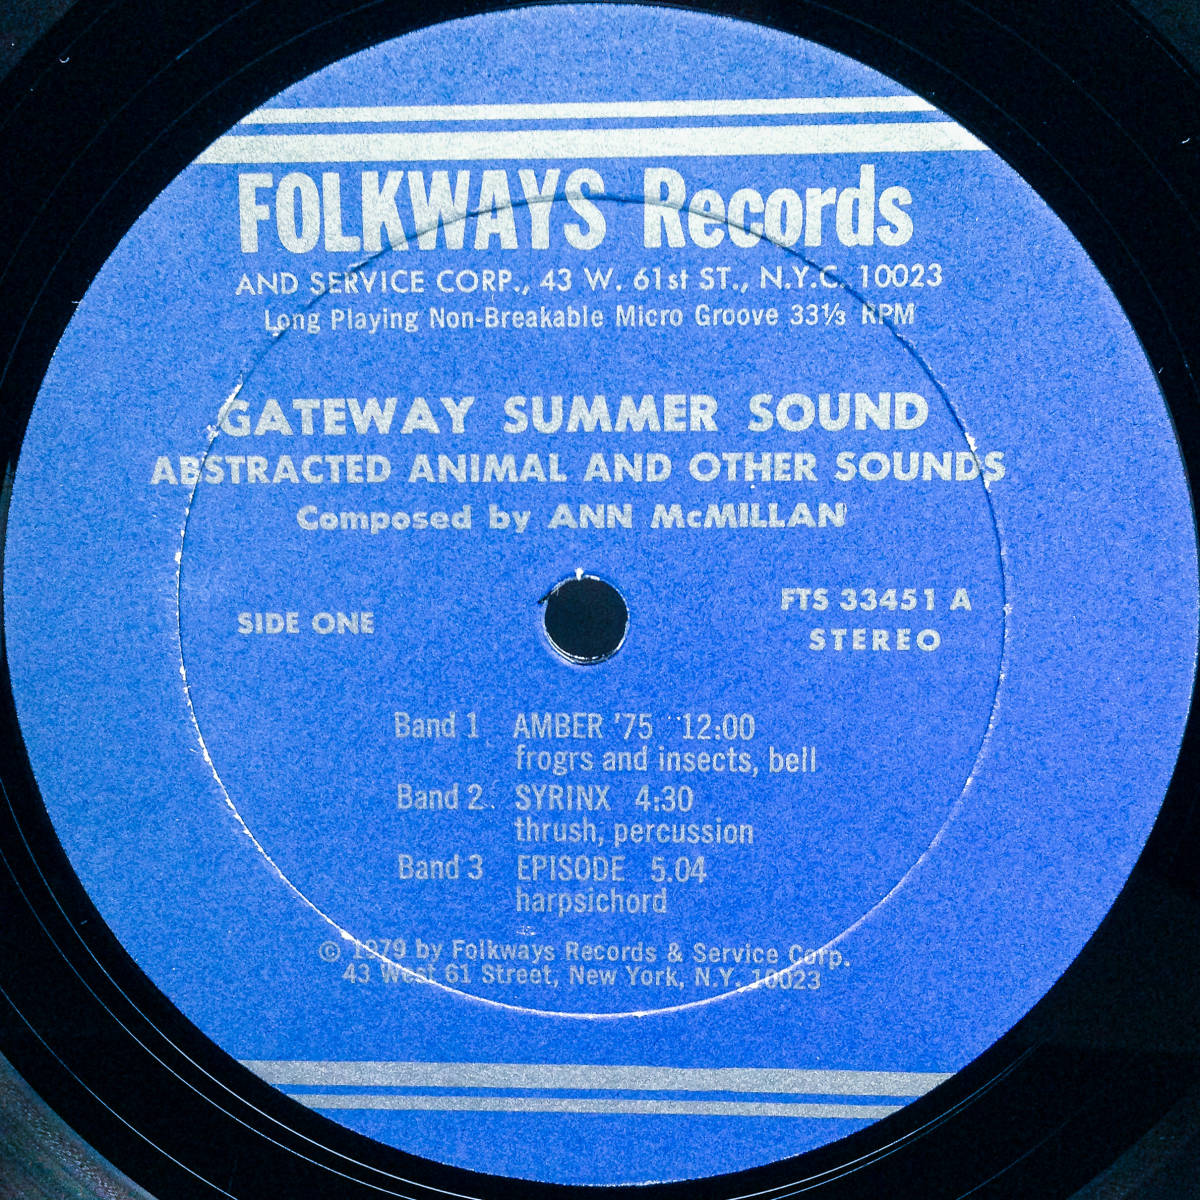 [LP] \'78 рис Orig / Ann McMillan / Gateway Summer Sound / Abstracted Animal & Other Sounds / Booklet имеется / Folkways / FTS 33451